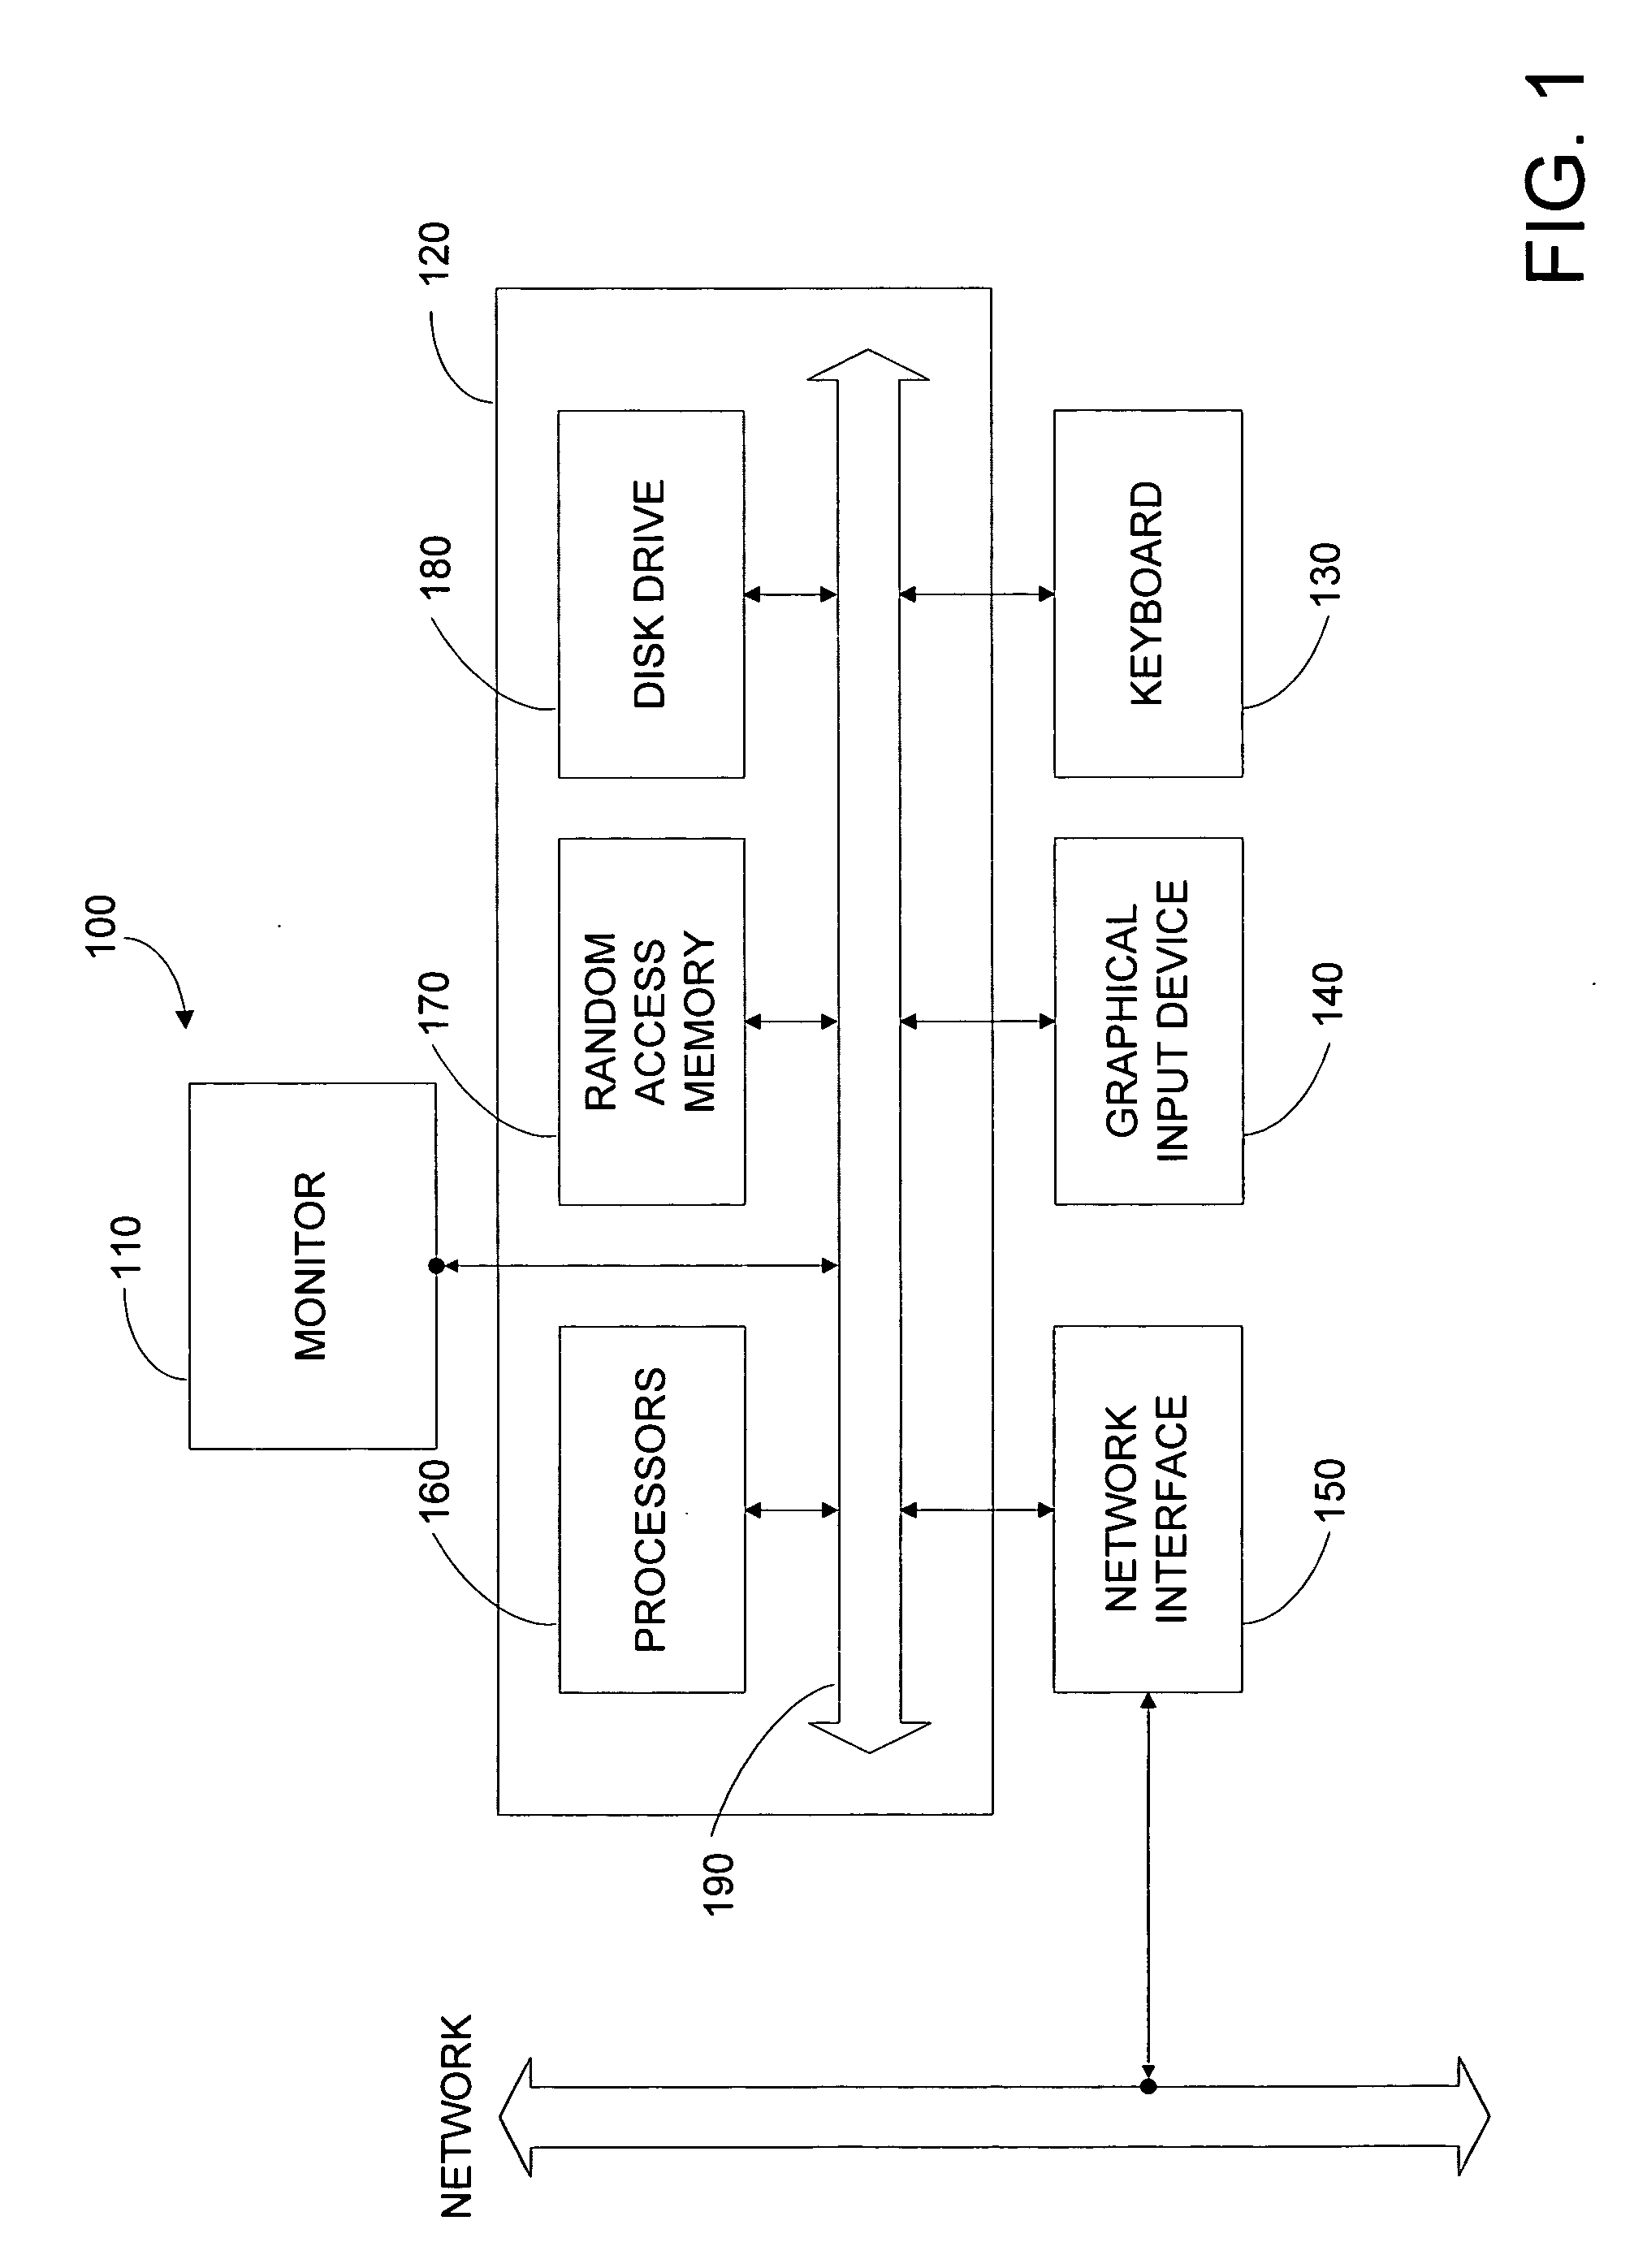 Manual component asset change isolation methods and apparatus